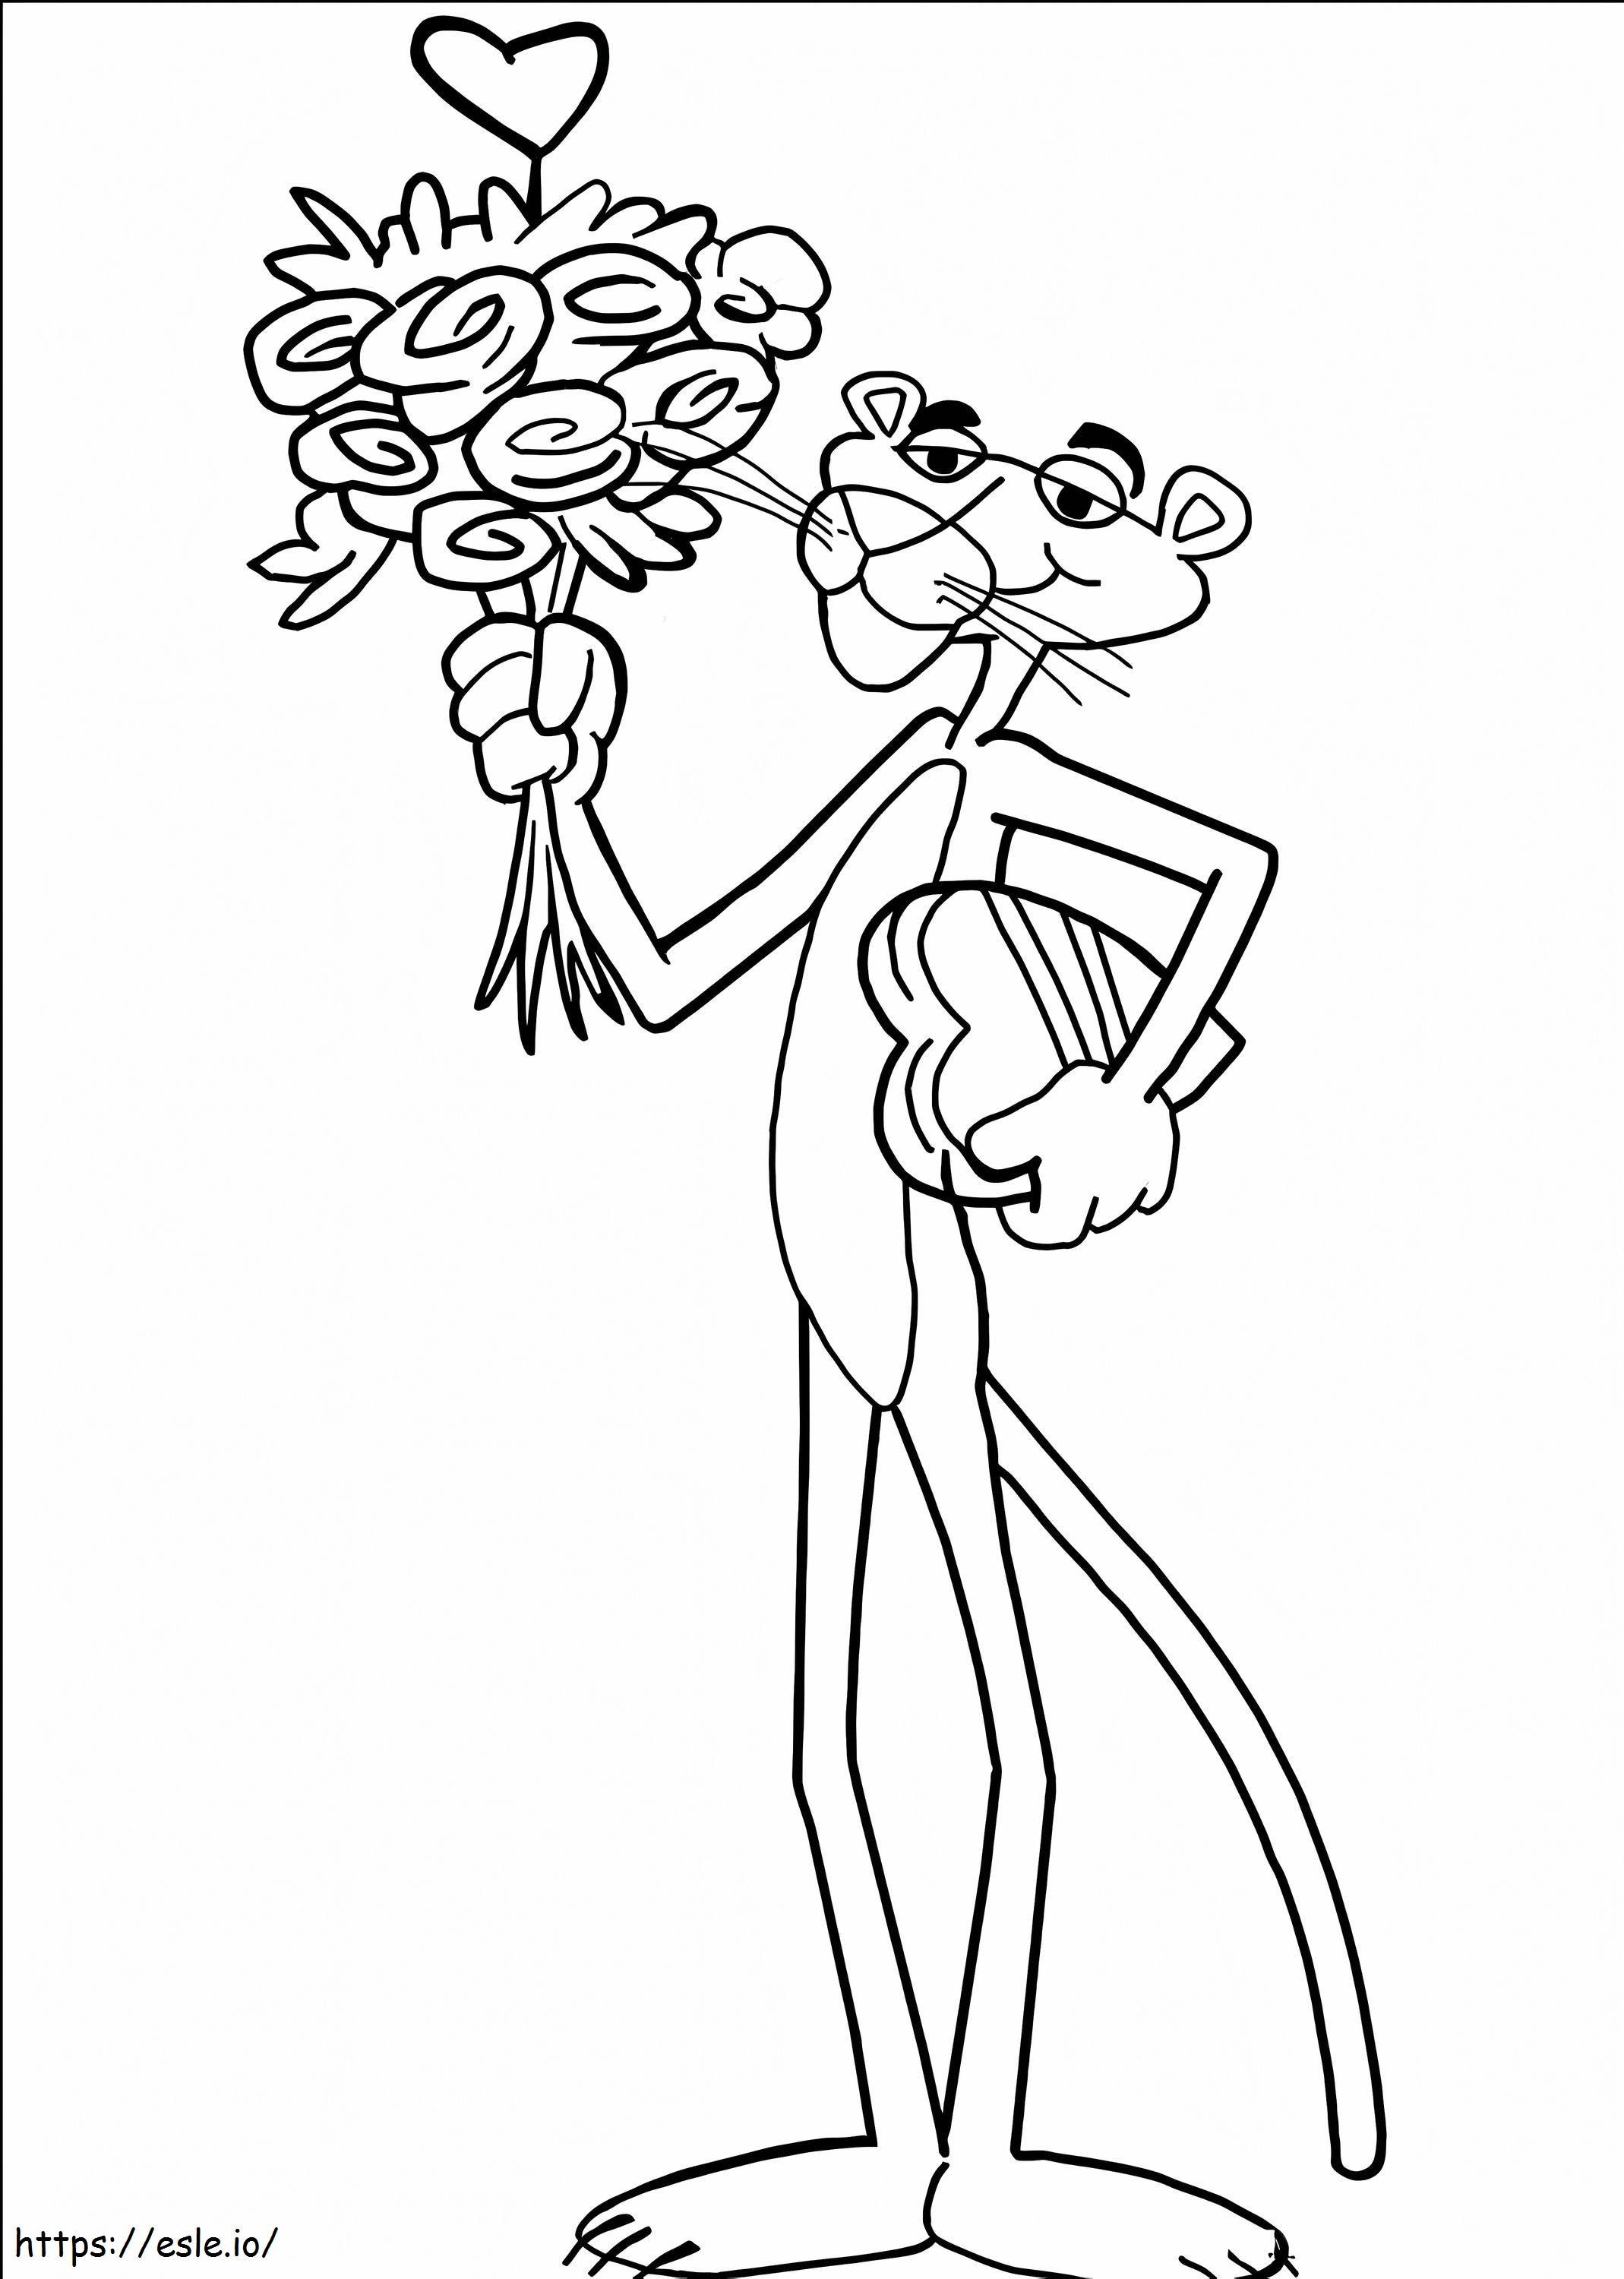 1539415067 Kissclipart Pink Panther Clipart Colouring Page A7Bc78Df1C876000 coloring page